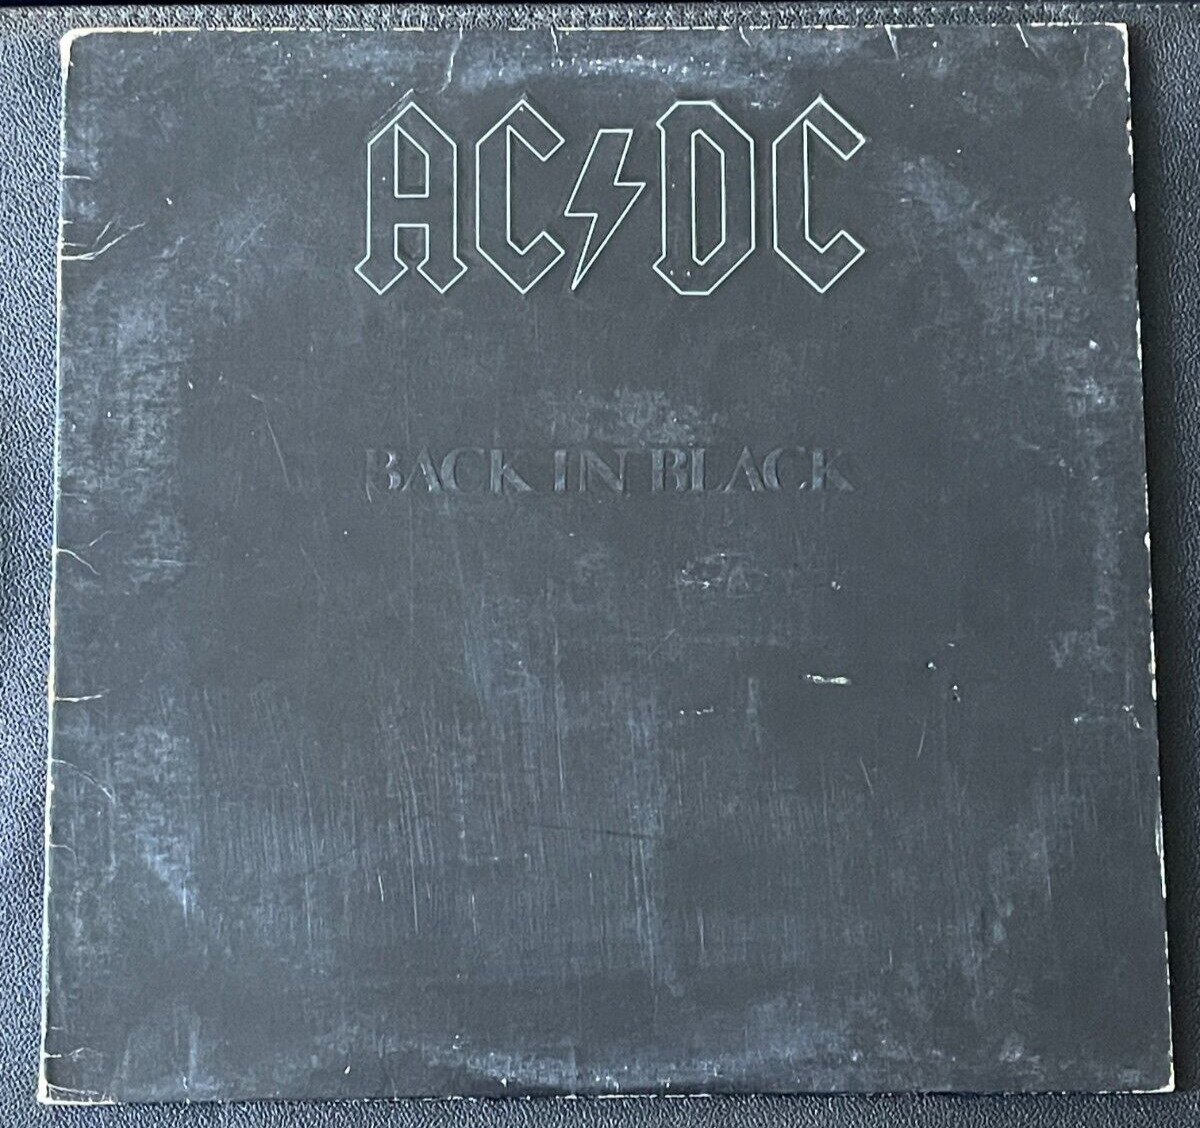 AC/DC - Back In Black - 1980 US 1st Pressing RARE EARLY PRESSING